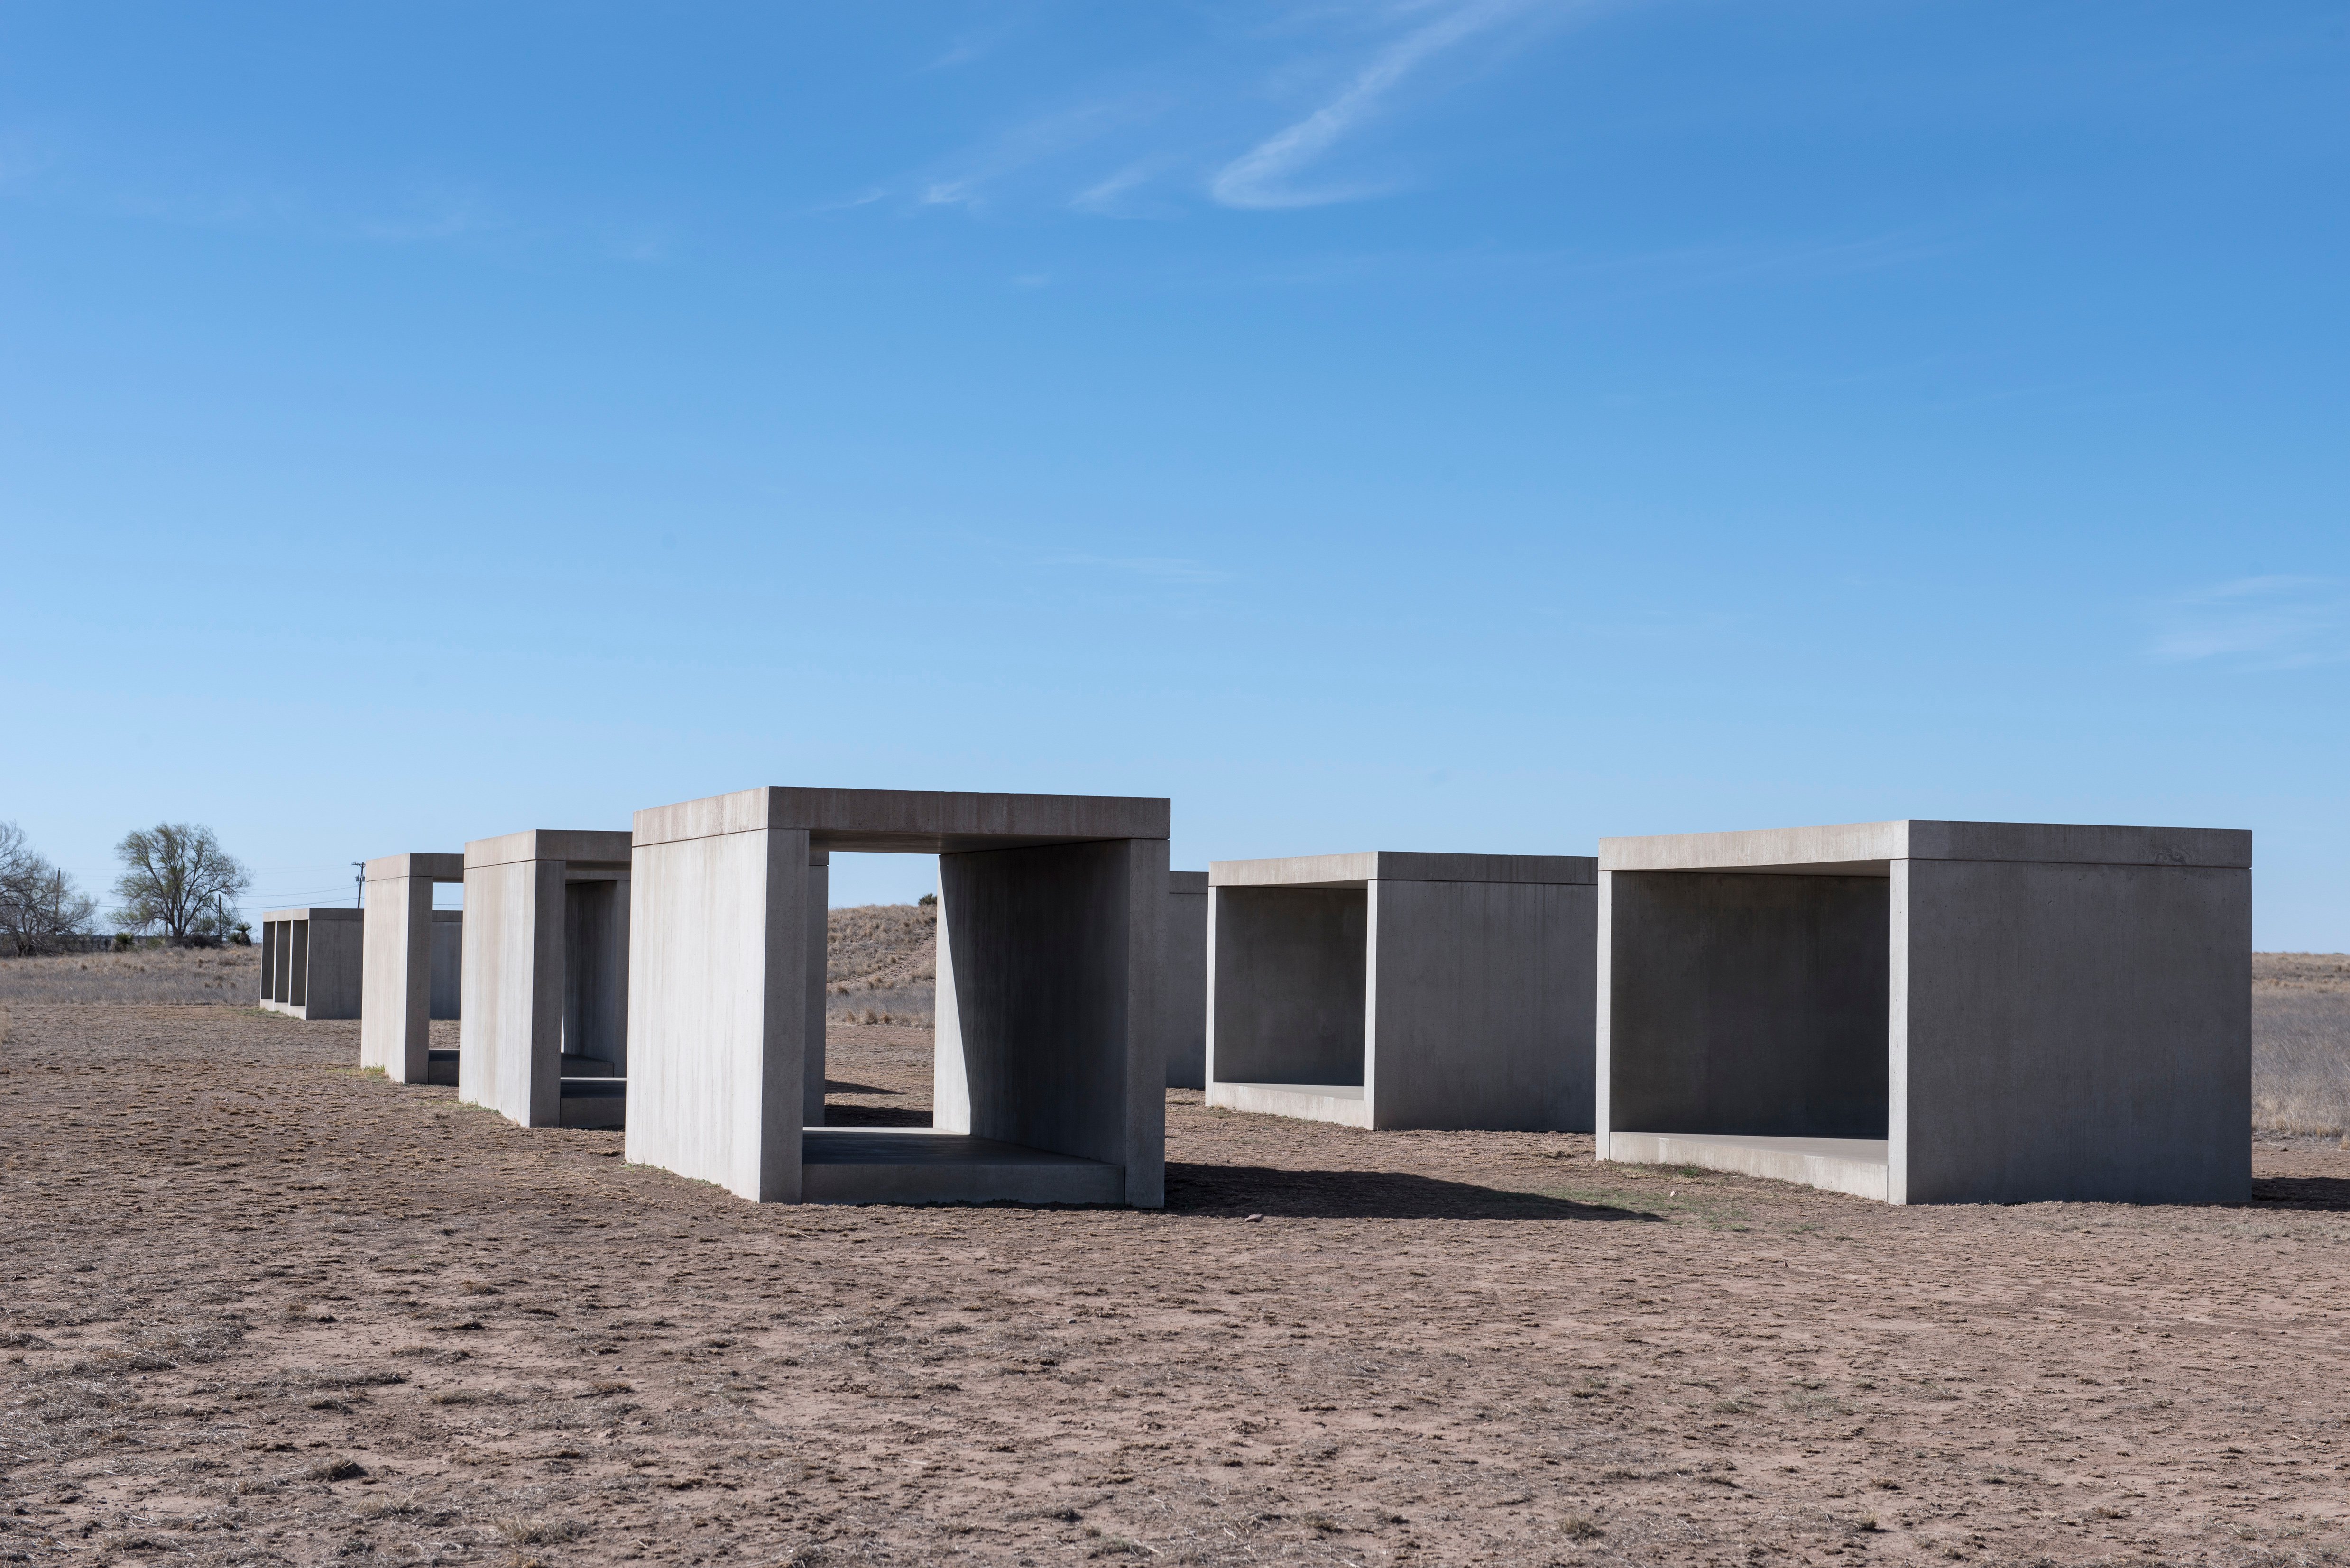 Art Becomes Retail Surprisingly Quickly': How Marfa Went From 